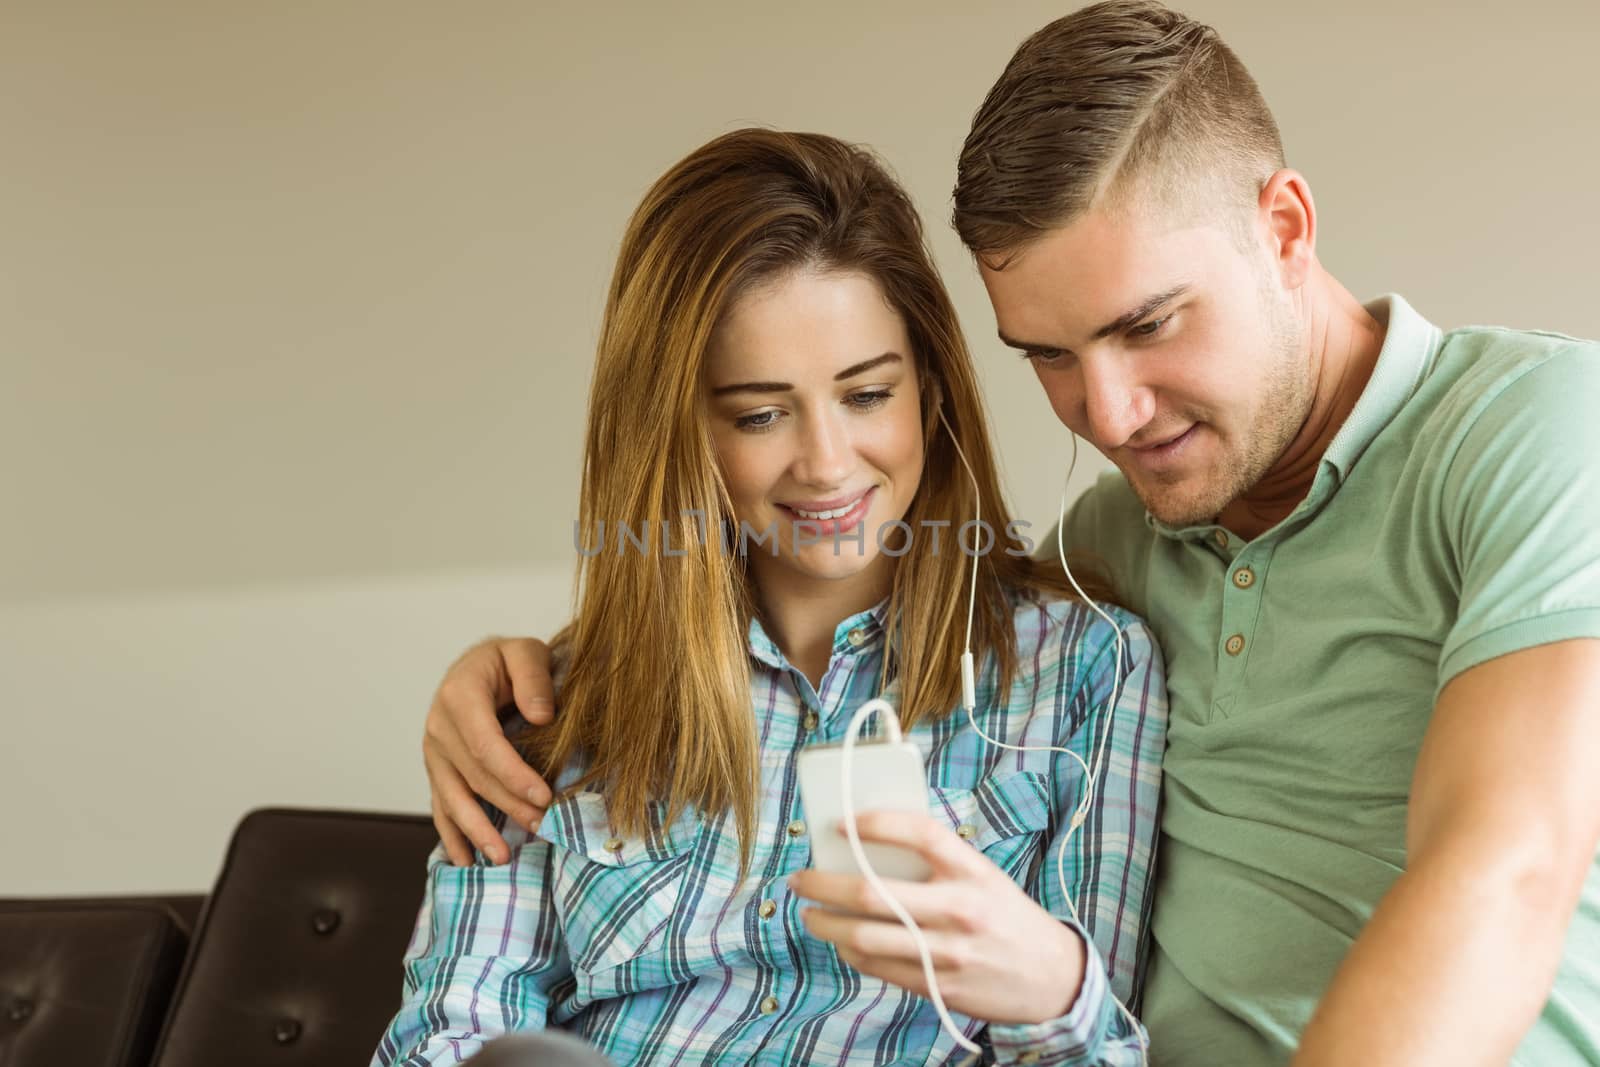 Cute couple relaxing on couch with smartphone at home in the living room